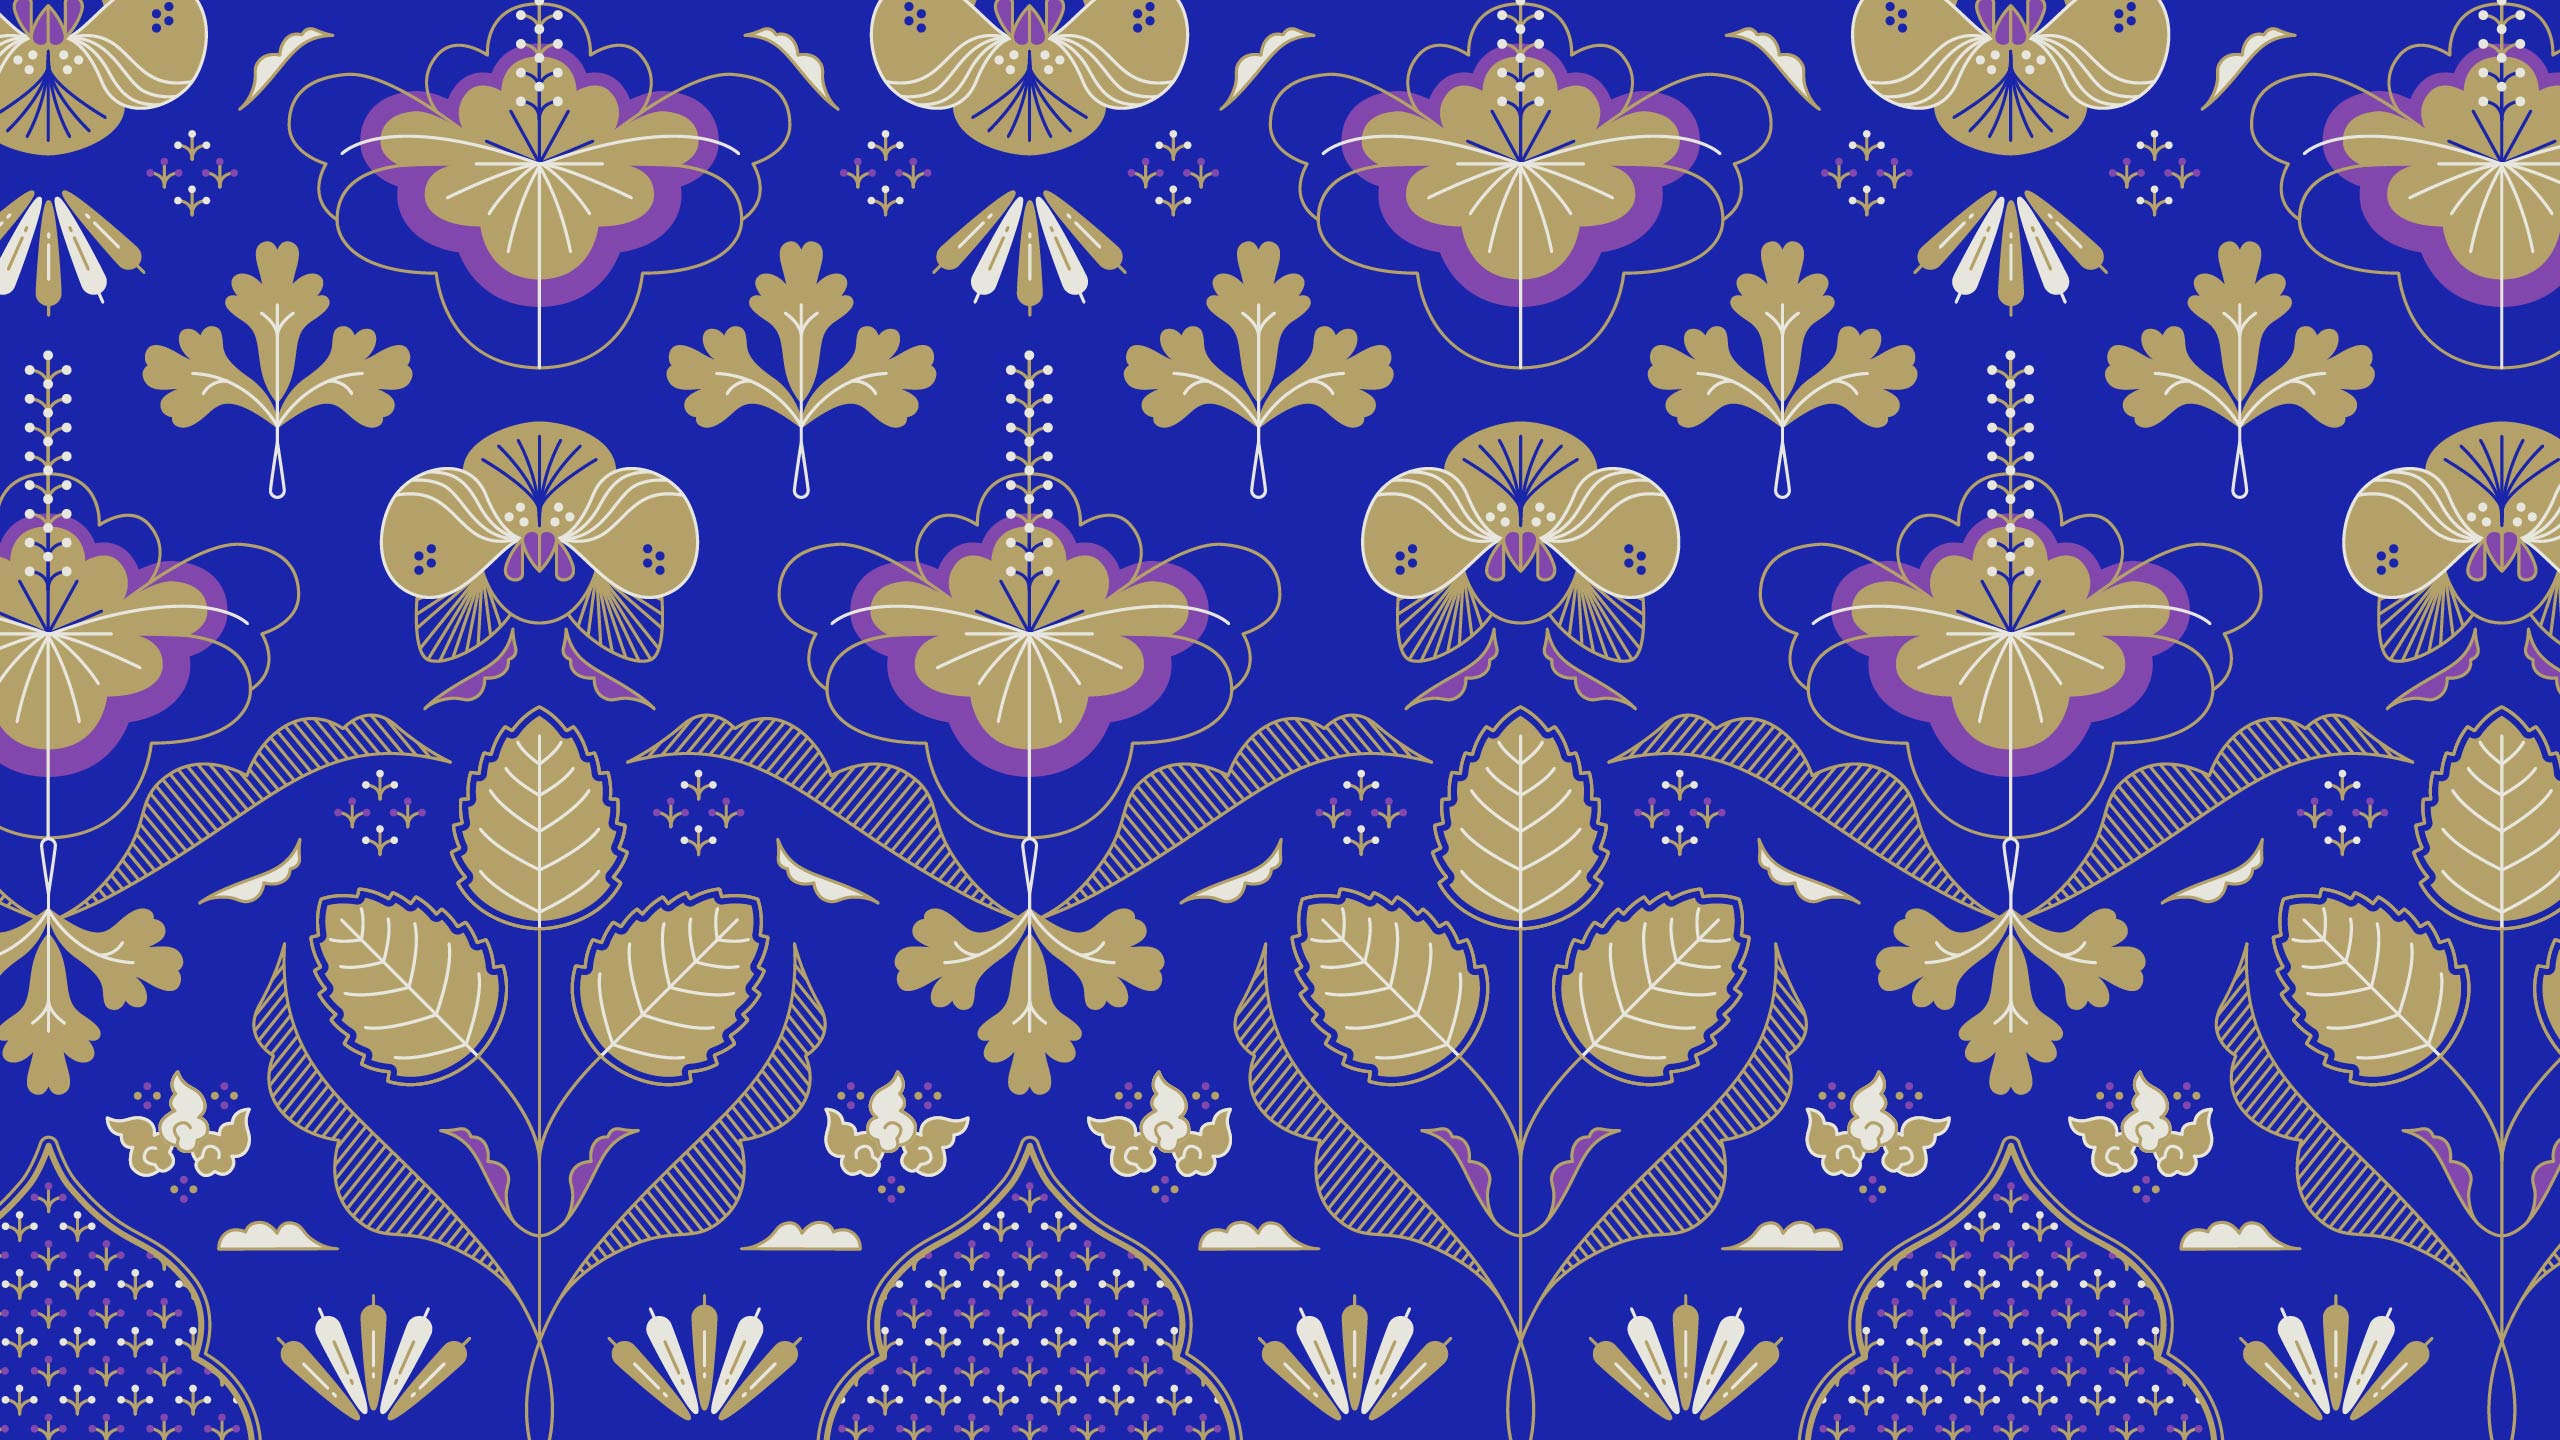 A vibrant pattern inspired by Thai plants, flowers, and spices for Thai restaurant Muang Thai